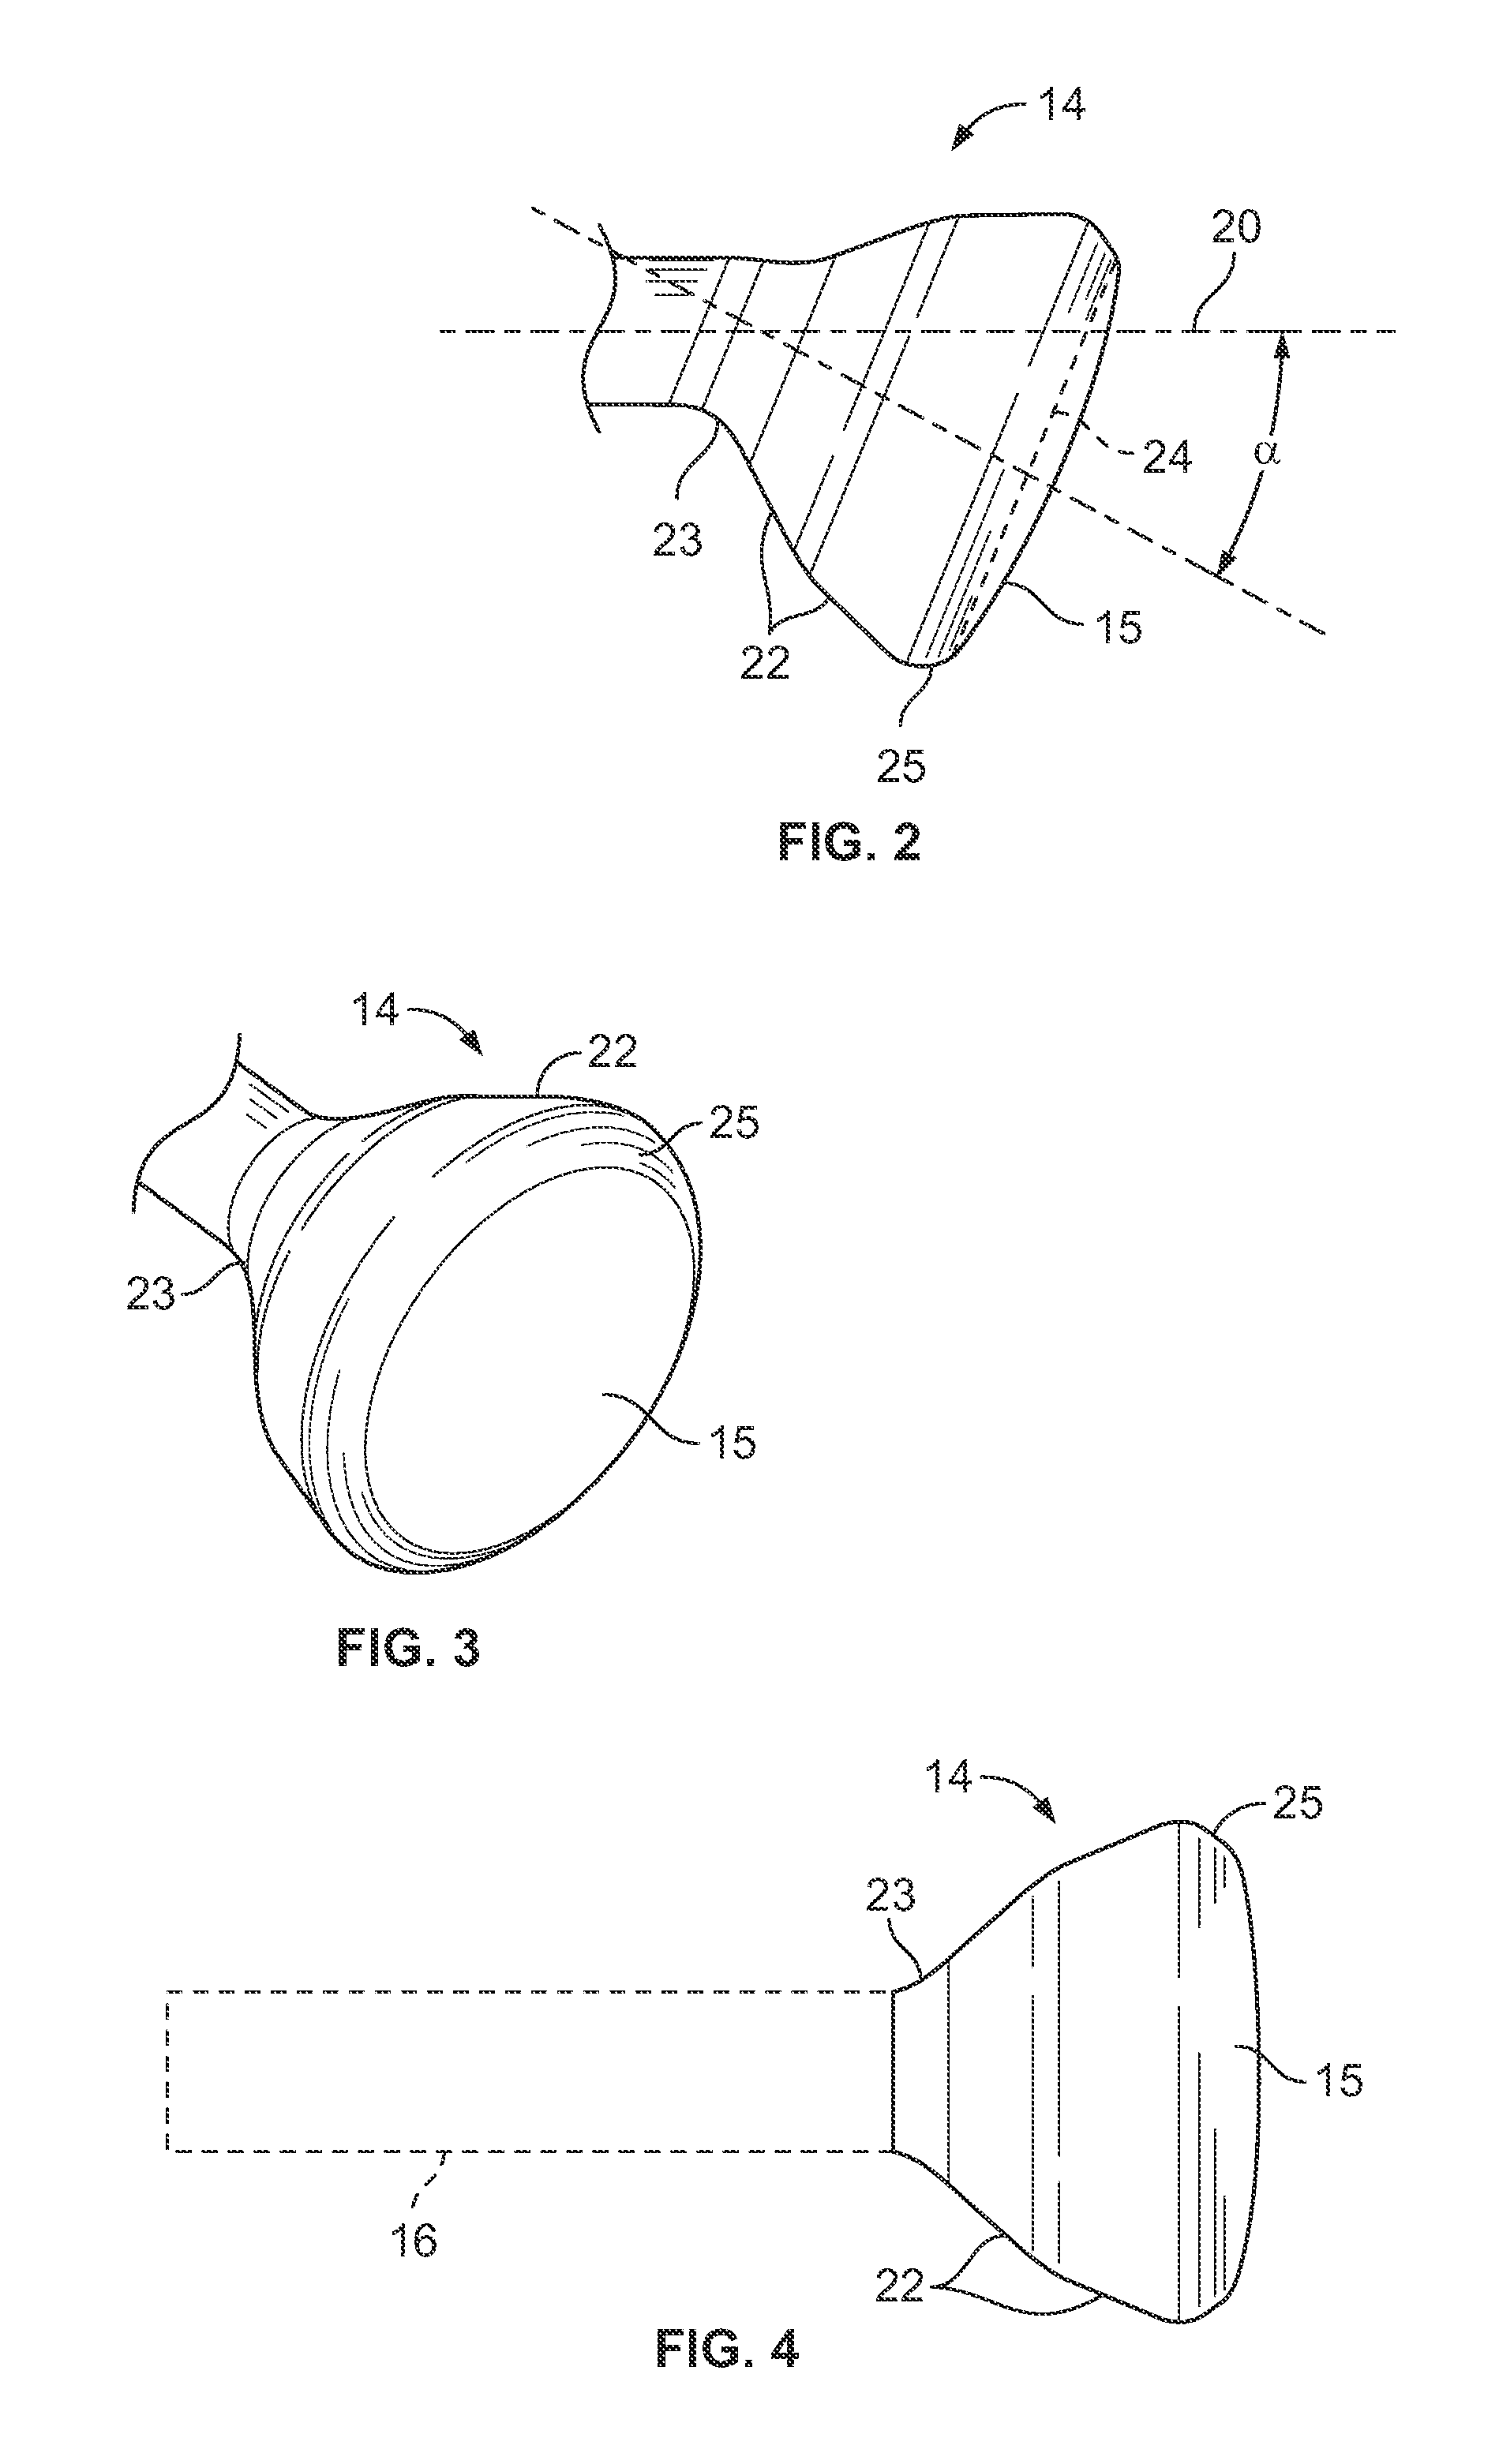 Stylus device for touch screen